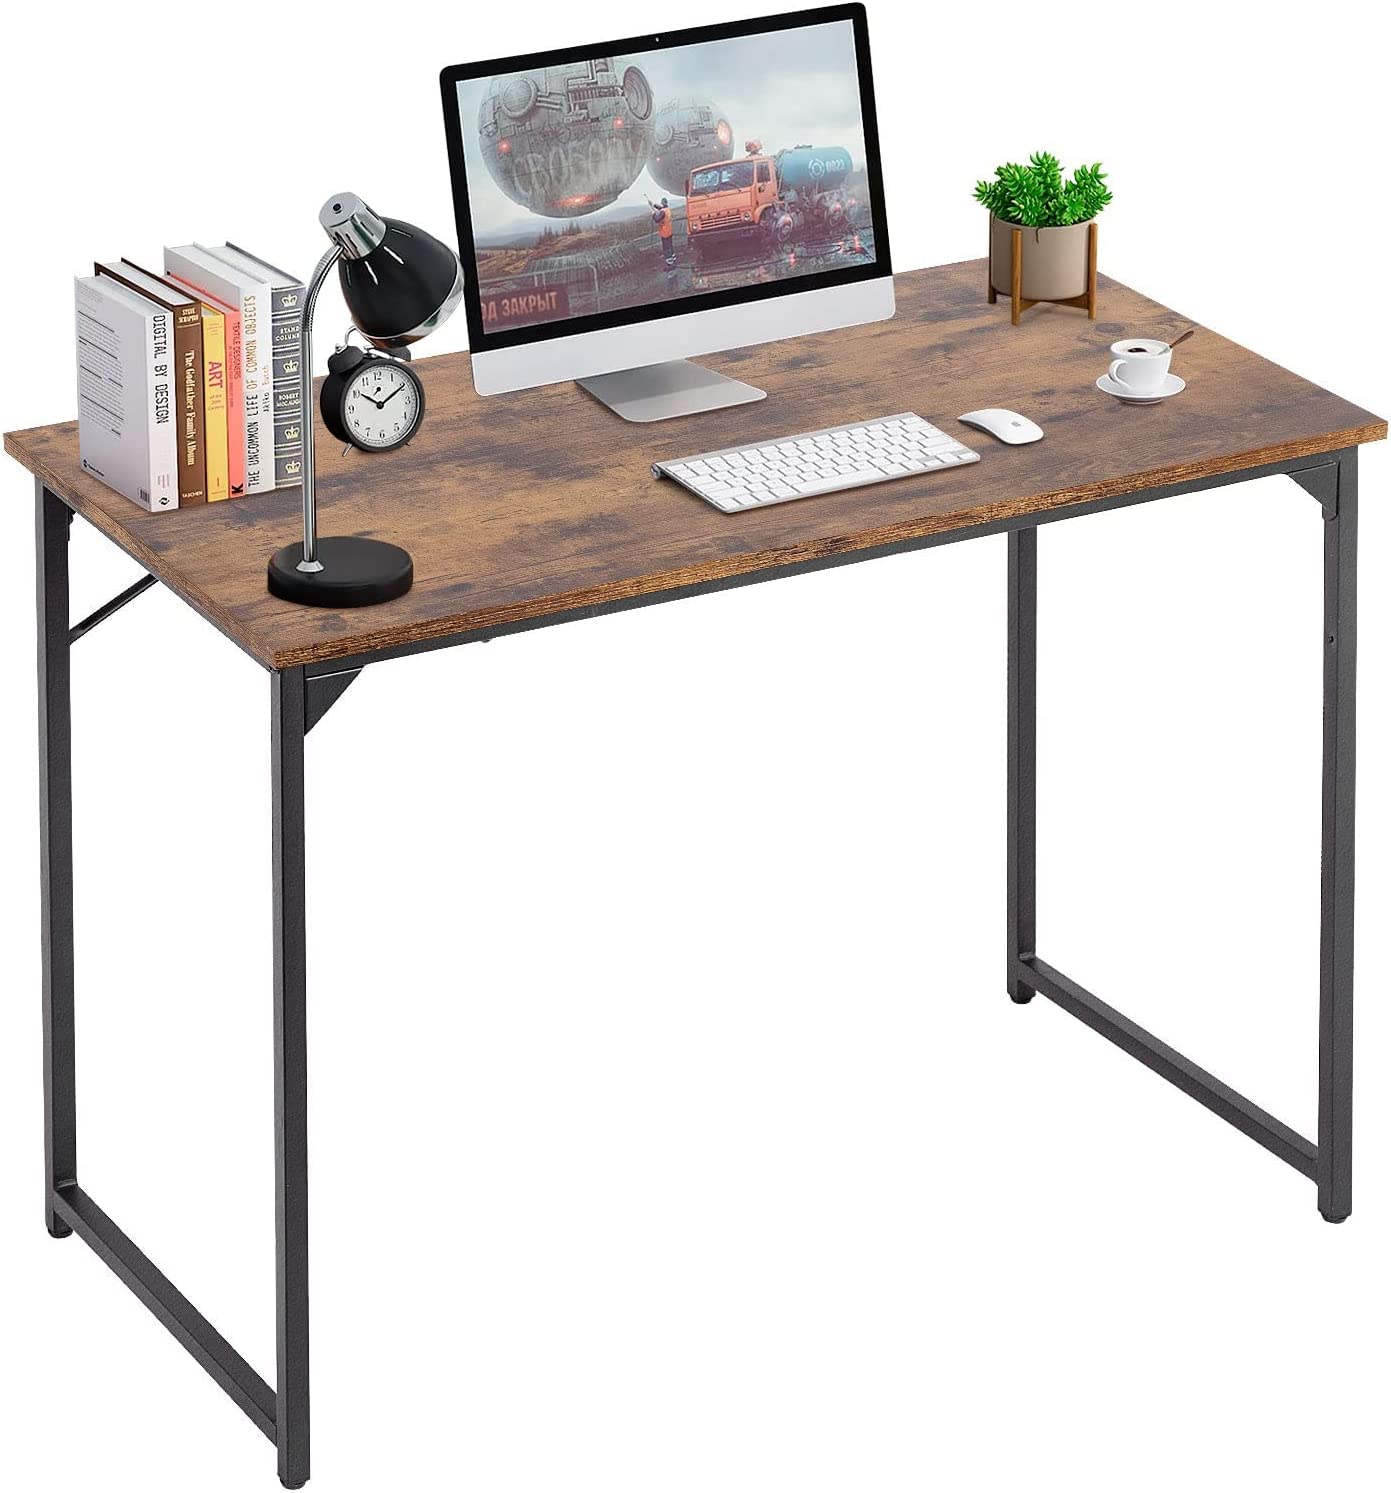 PayLessHere 39 inch Computer Desk Modern Writing Desk, Simple Study Table, Industrial Office Desk, Sturdy Laptop Table for Home Office, Vintage - image 2 of 7